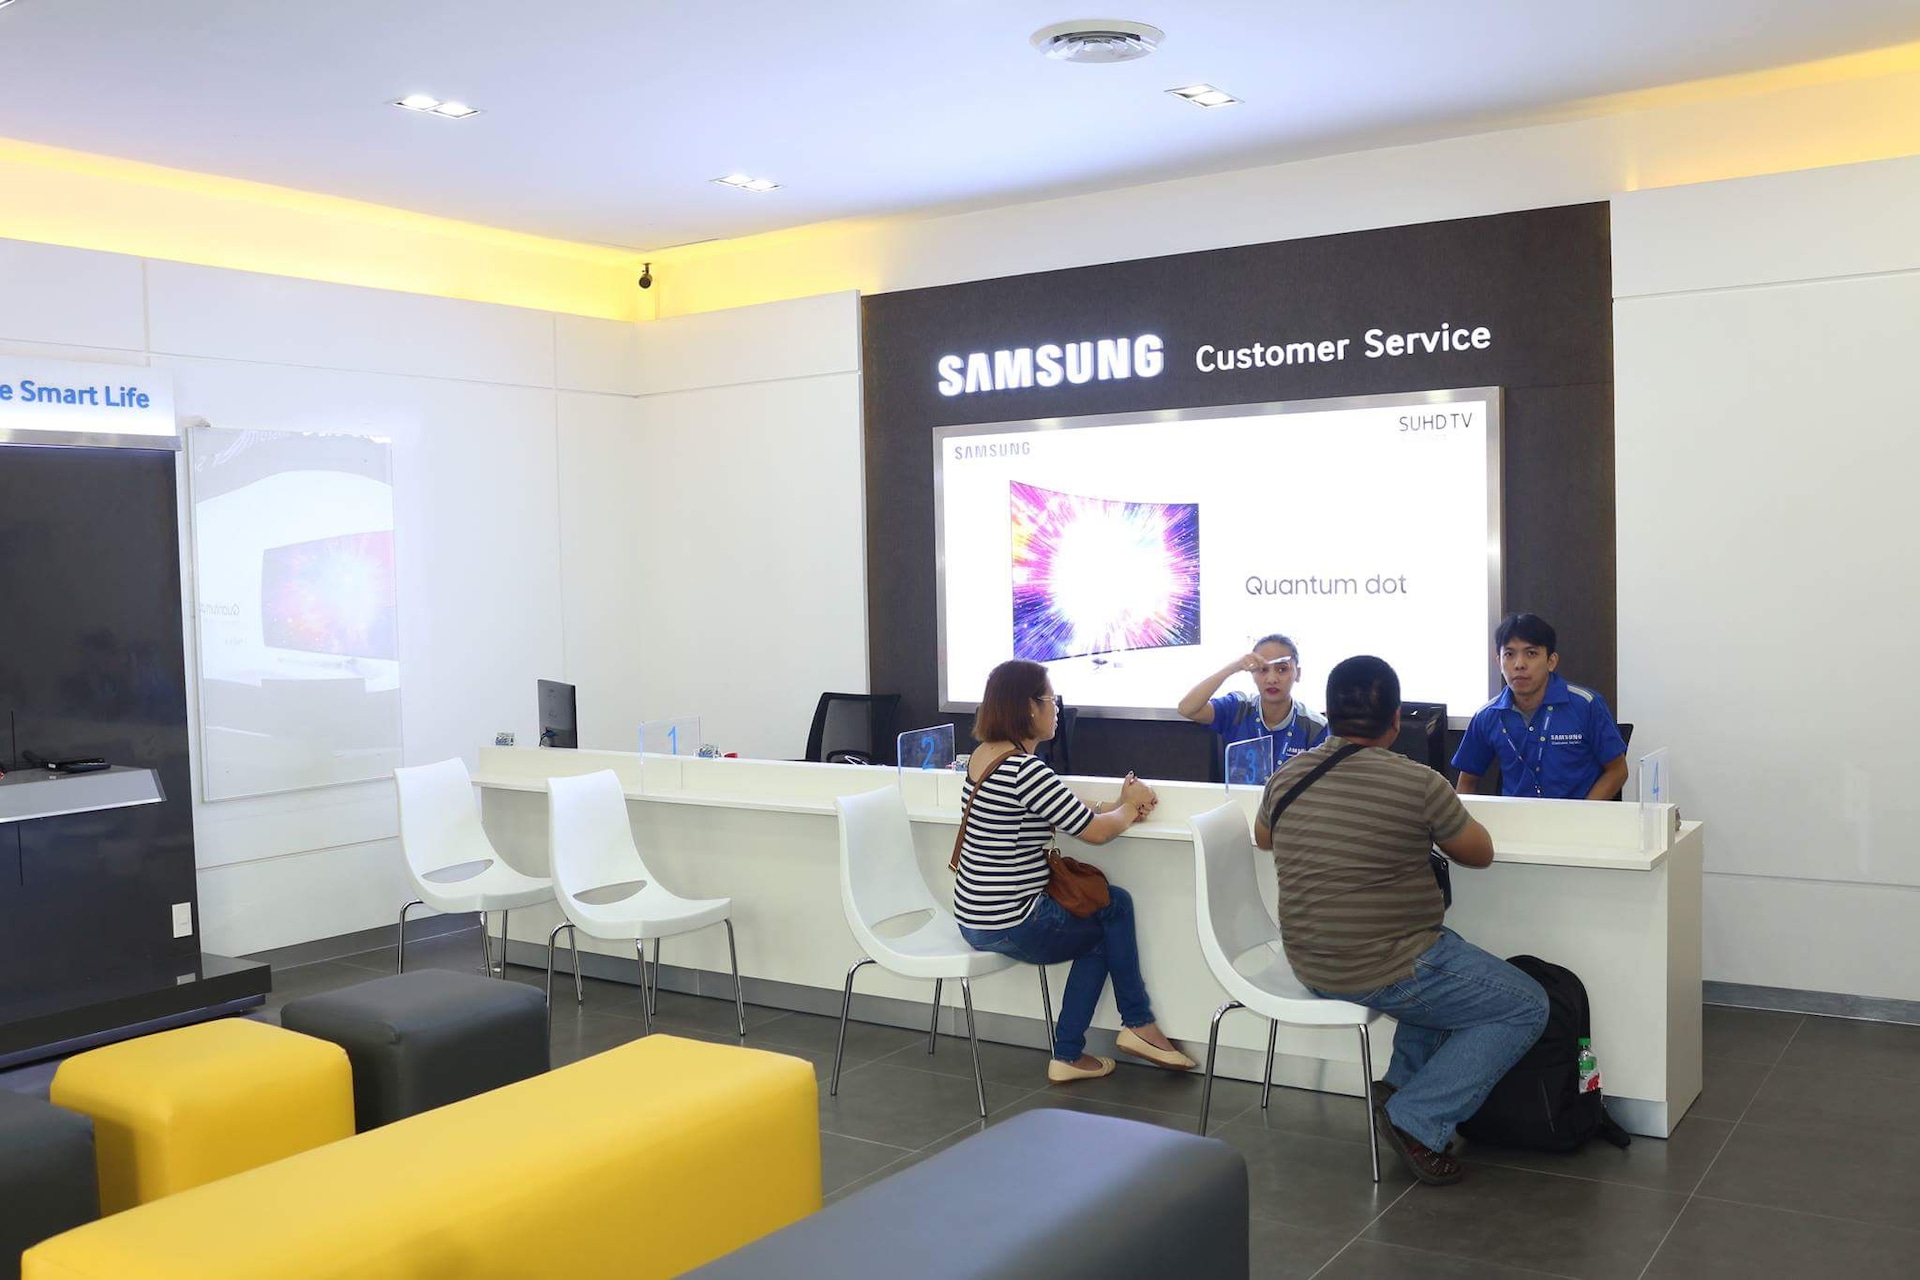 Samsung Newly Renovated Service Center: Chronicles Works and Services Inc.